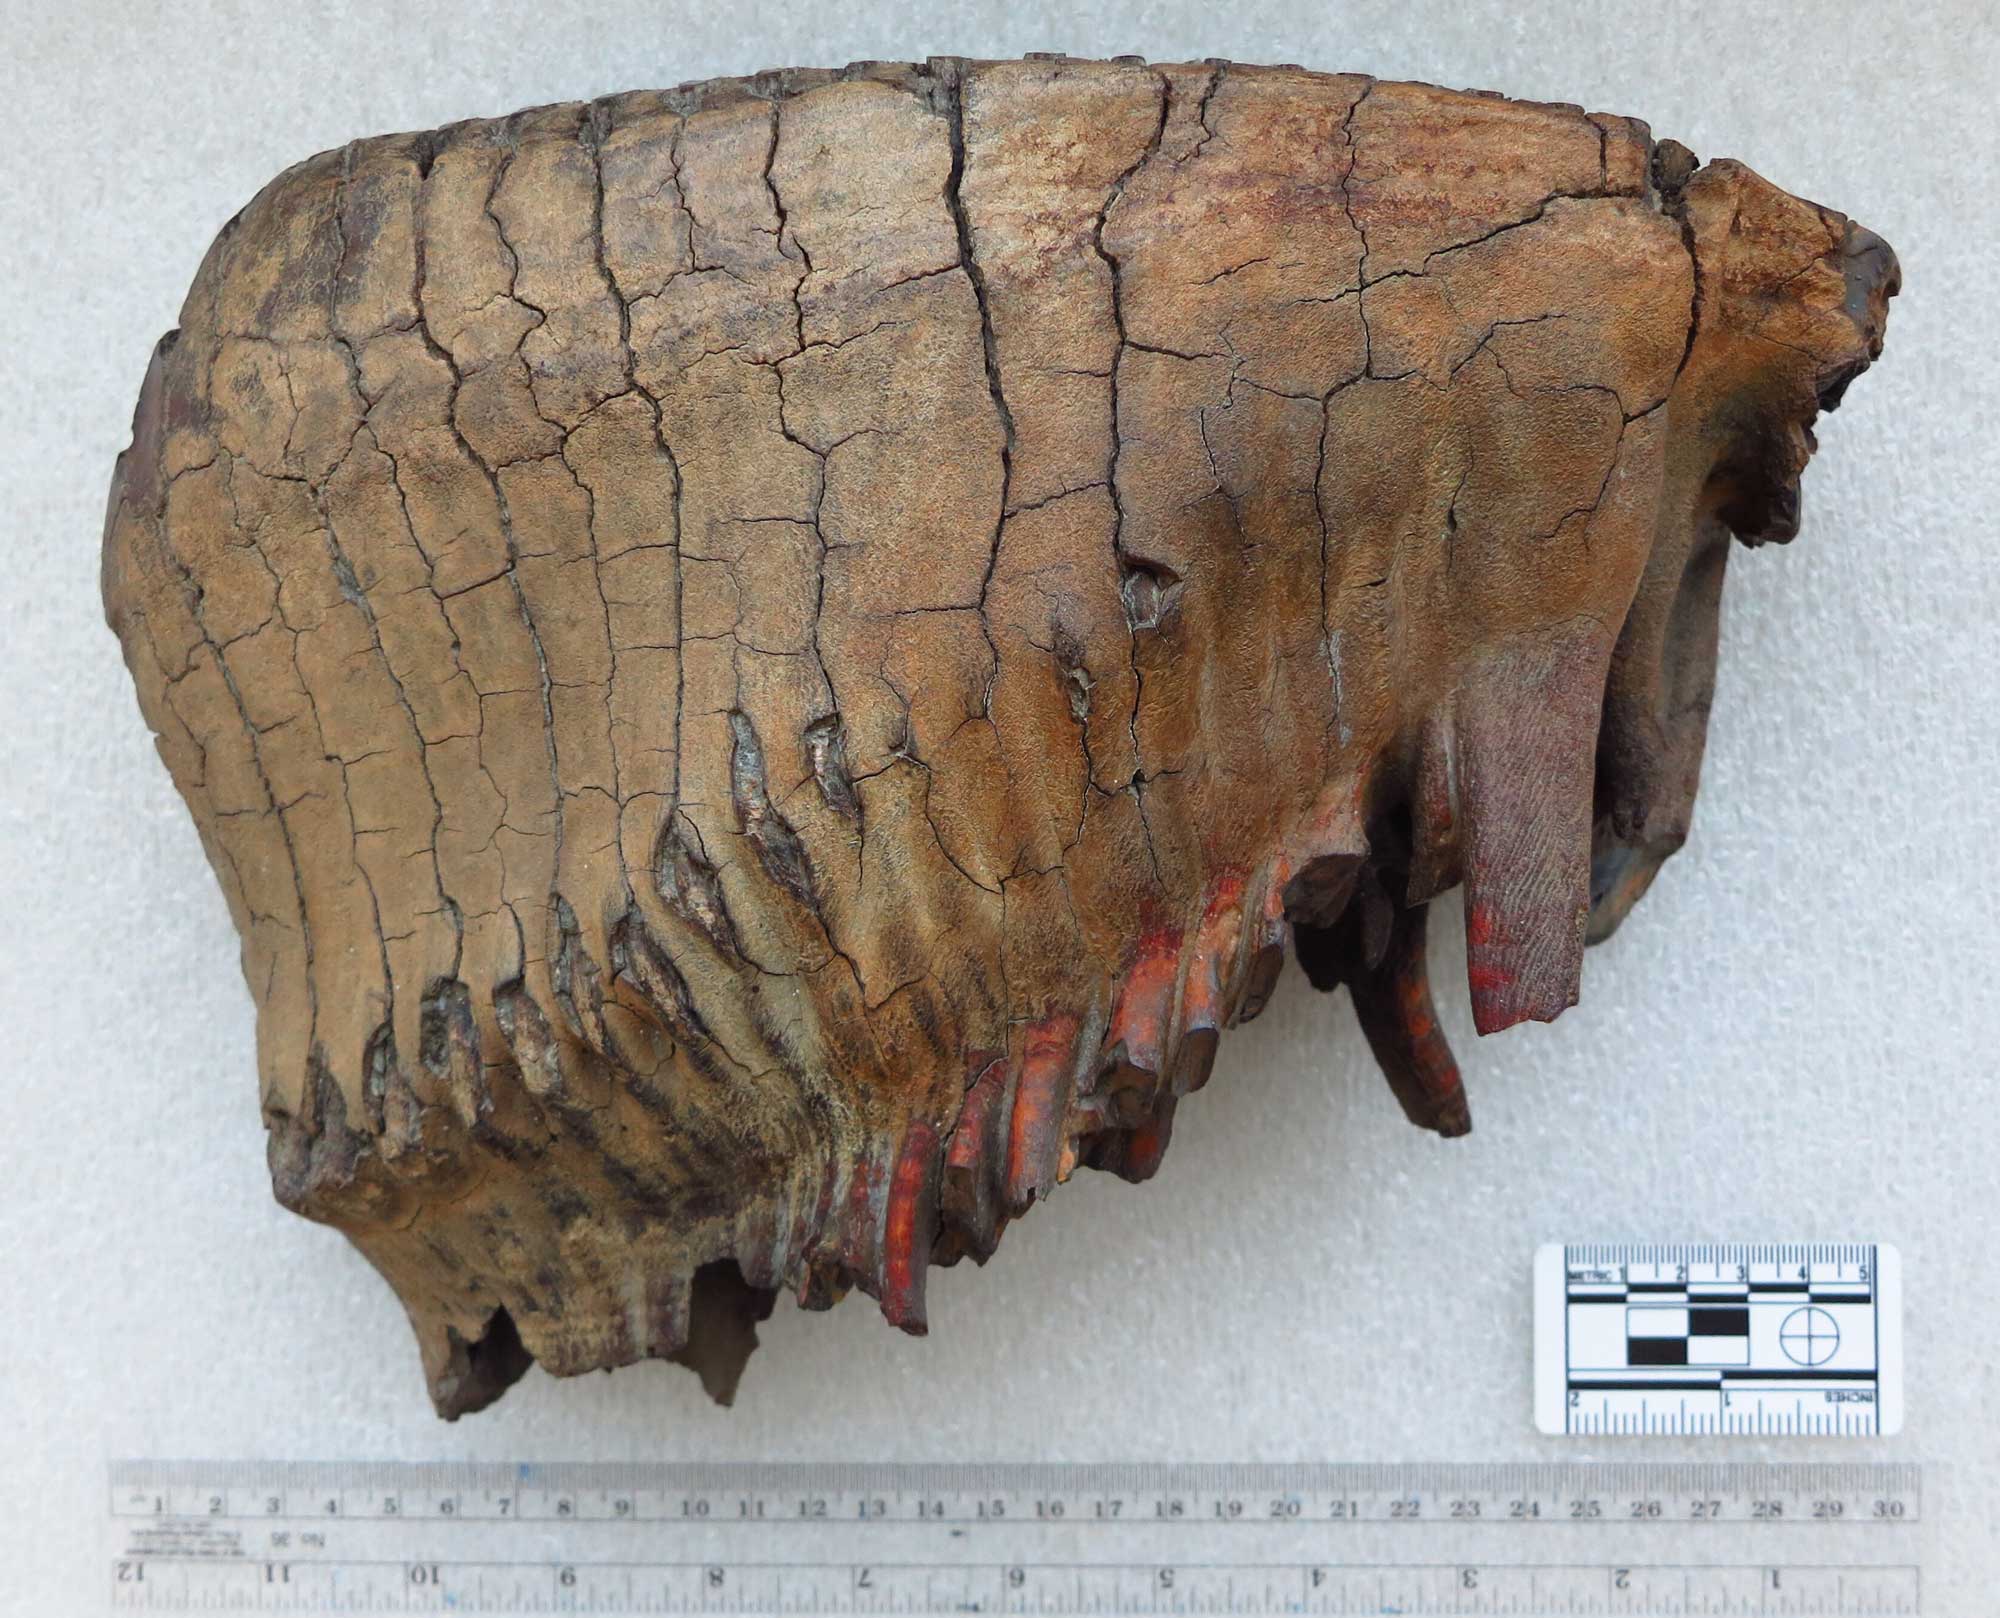 Photograph of a mammoth molar from the side. The molar has a flat chewing surface and the underside or roots form a diagonal surface. The tooth is brown. A ruler shows that the tooth is about 30 centimeters or 1 foot in length.